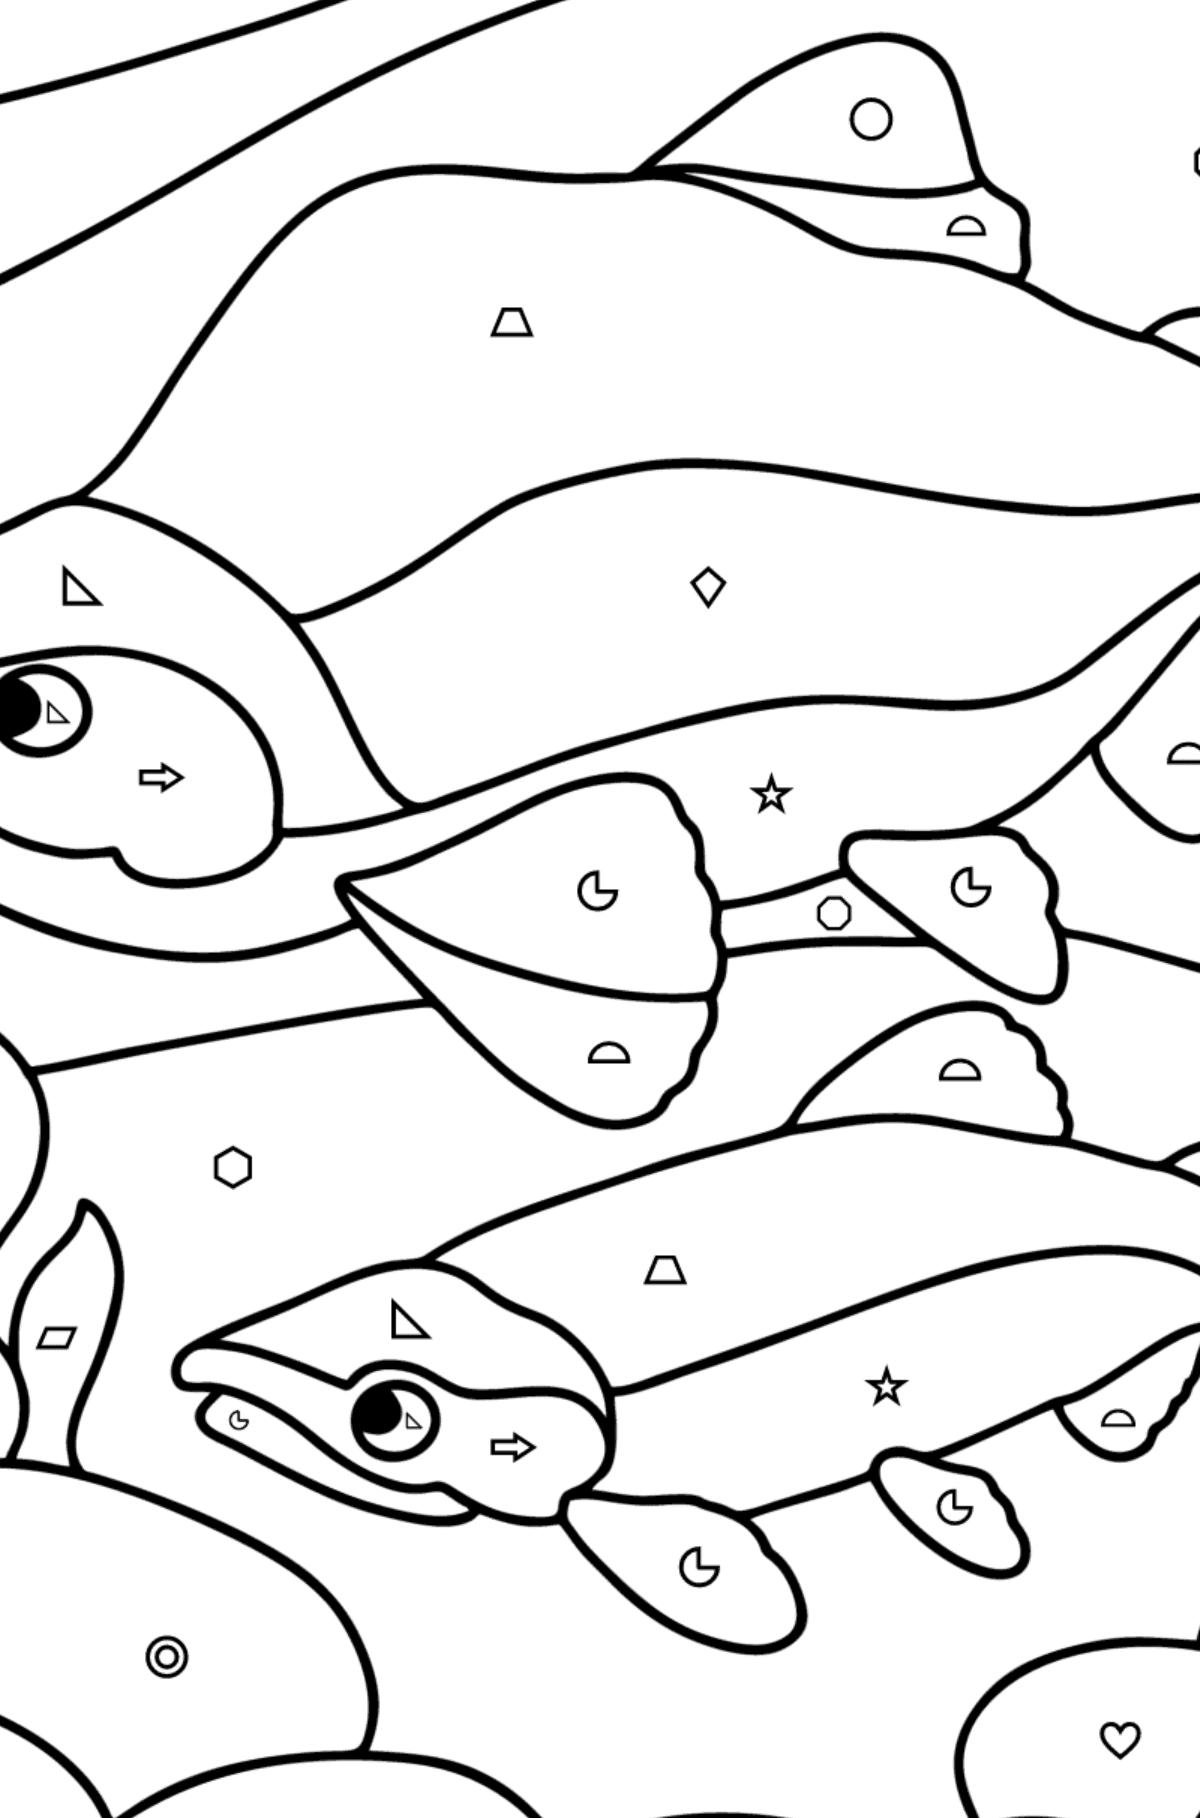 Red salmon coloring page - Coloring by Geometric Shapes for Kids